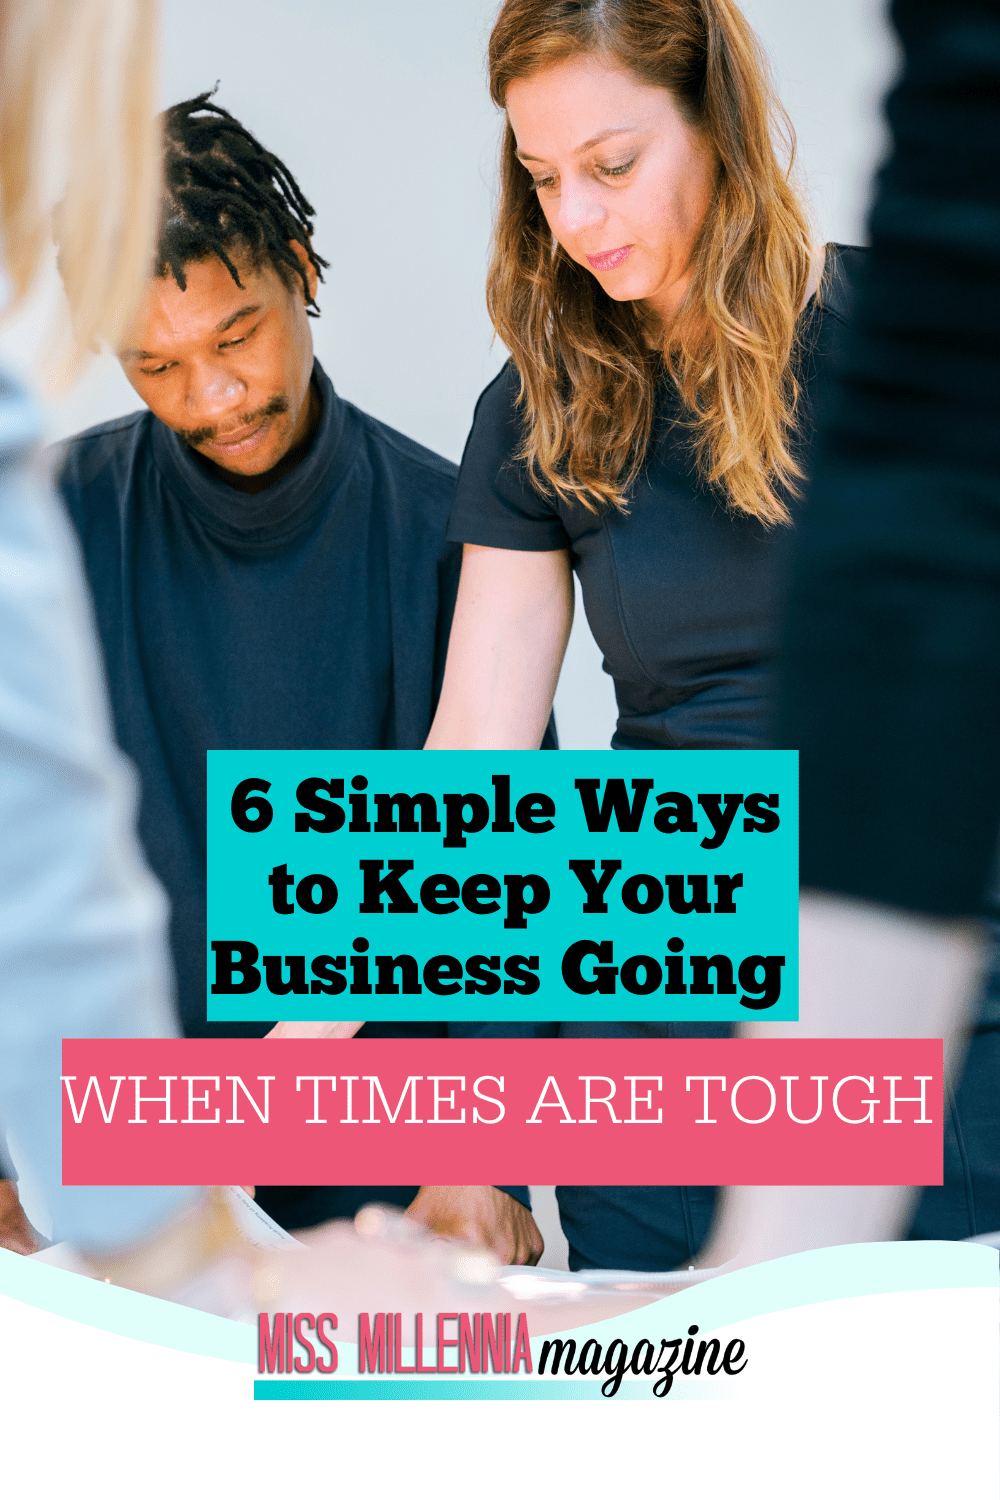 6 Simple Ways to Keep Your Business Going When Times Are Tough